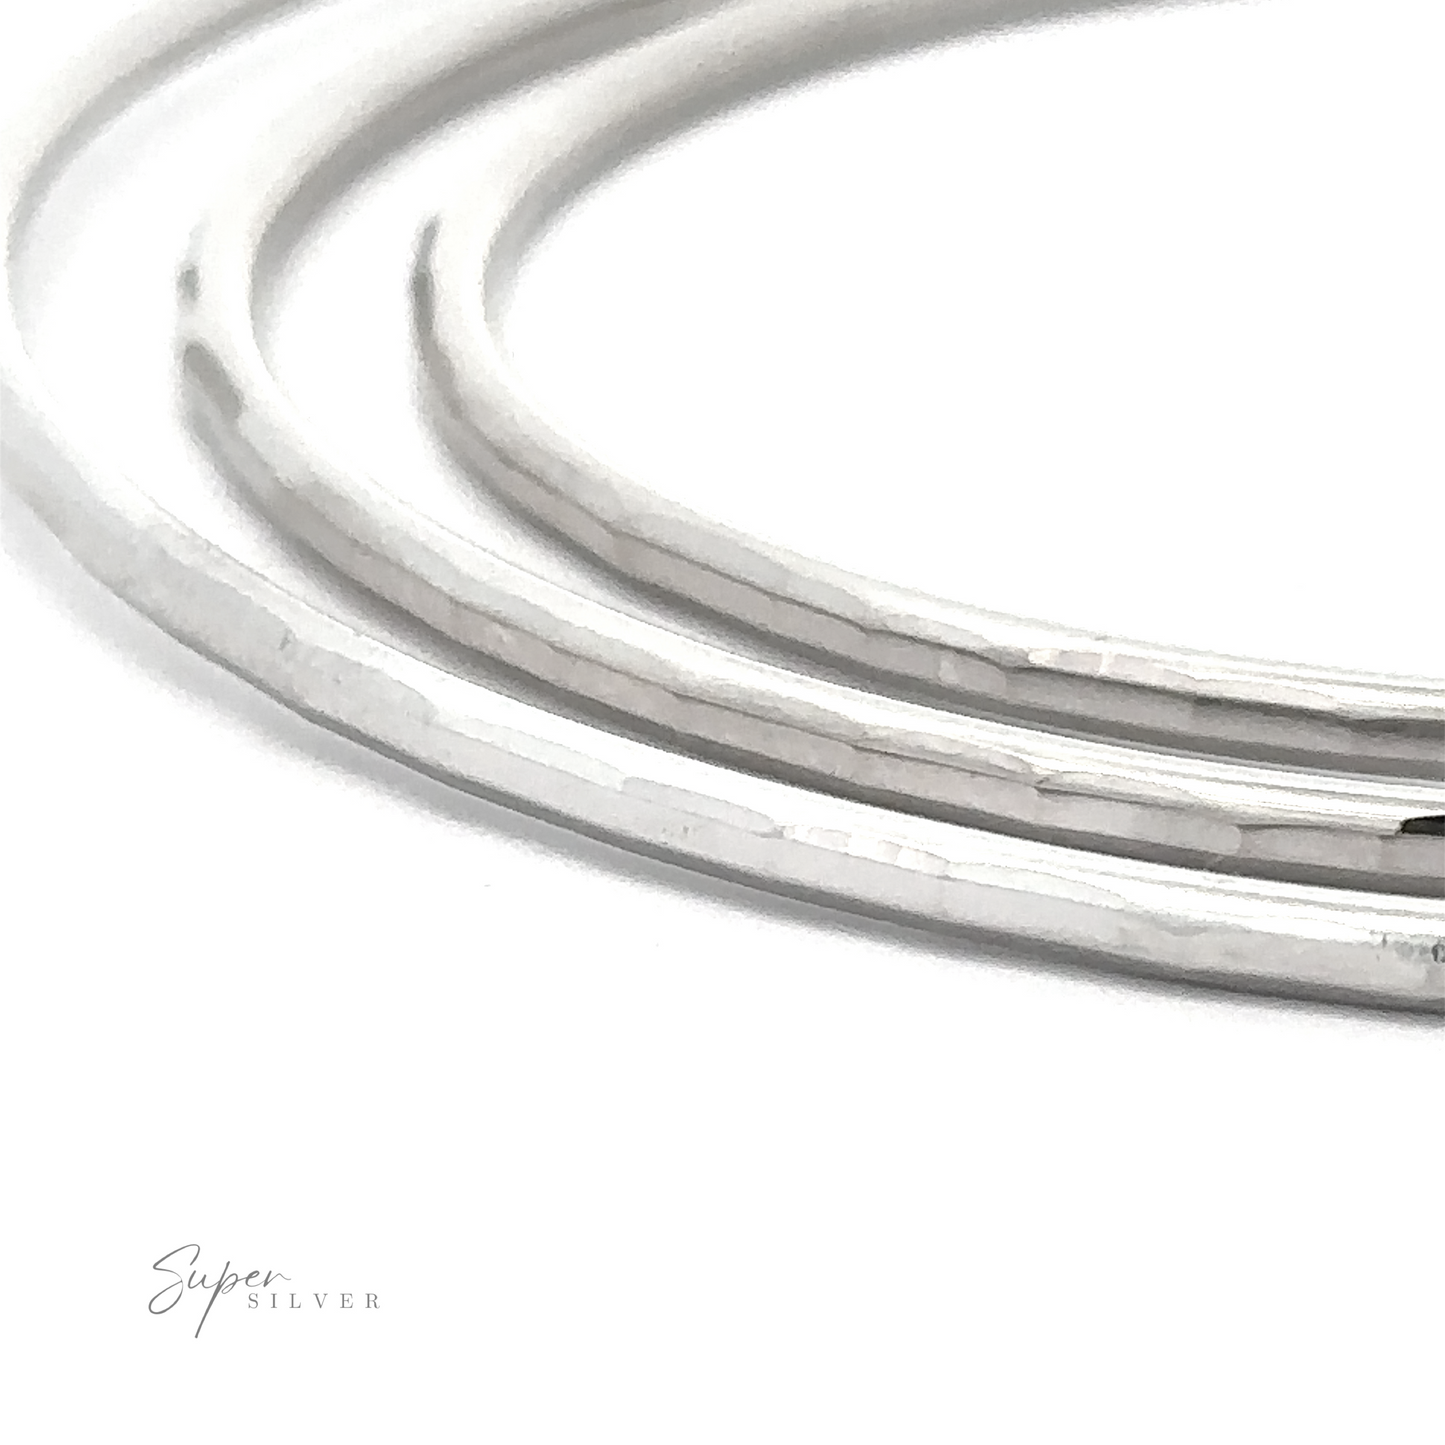 Close-up of four 2mm Diamond Cut Hoop Earrings with a rhodium finish, displayed on a white surface with the text "super silver" in elegant script.